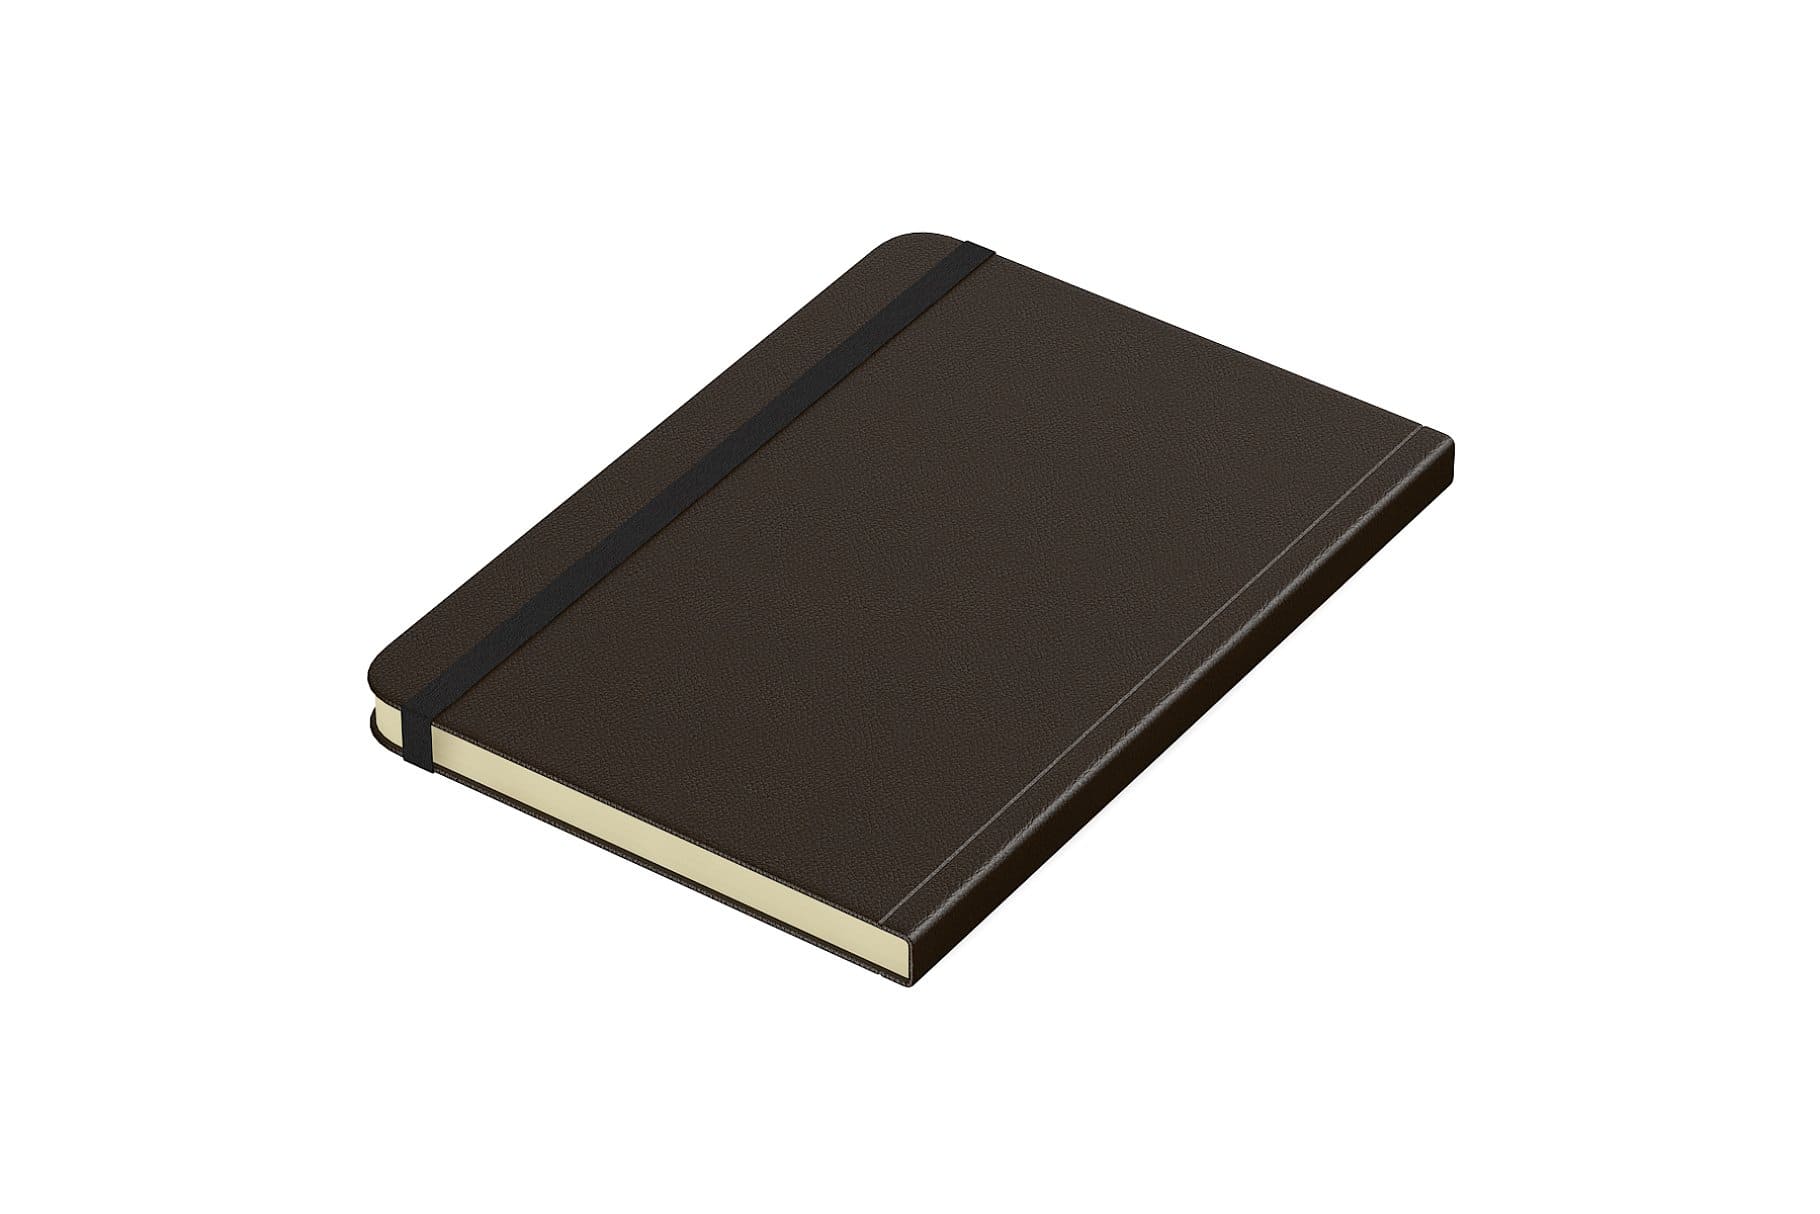 3D model of a notebook with textured binding.